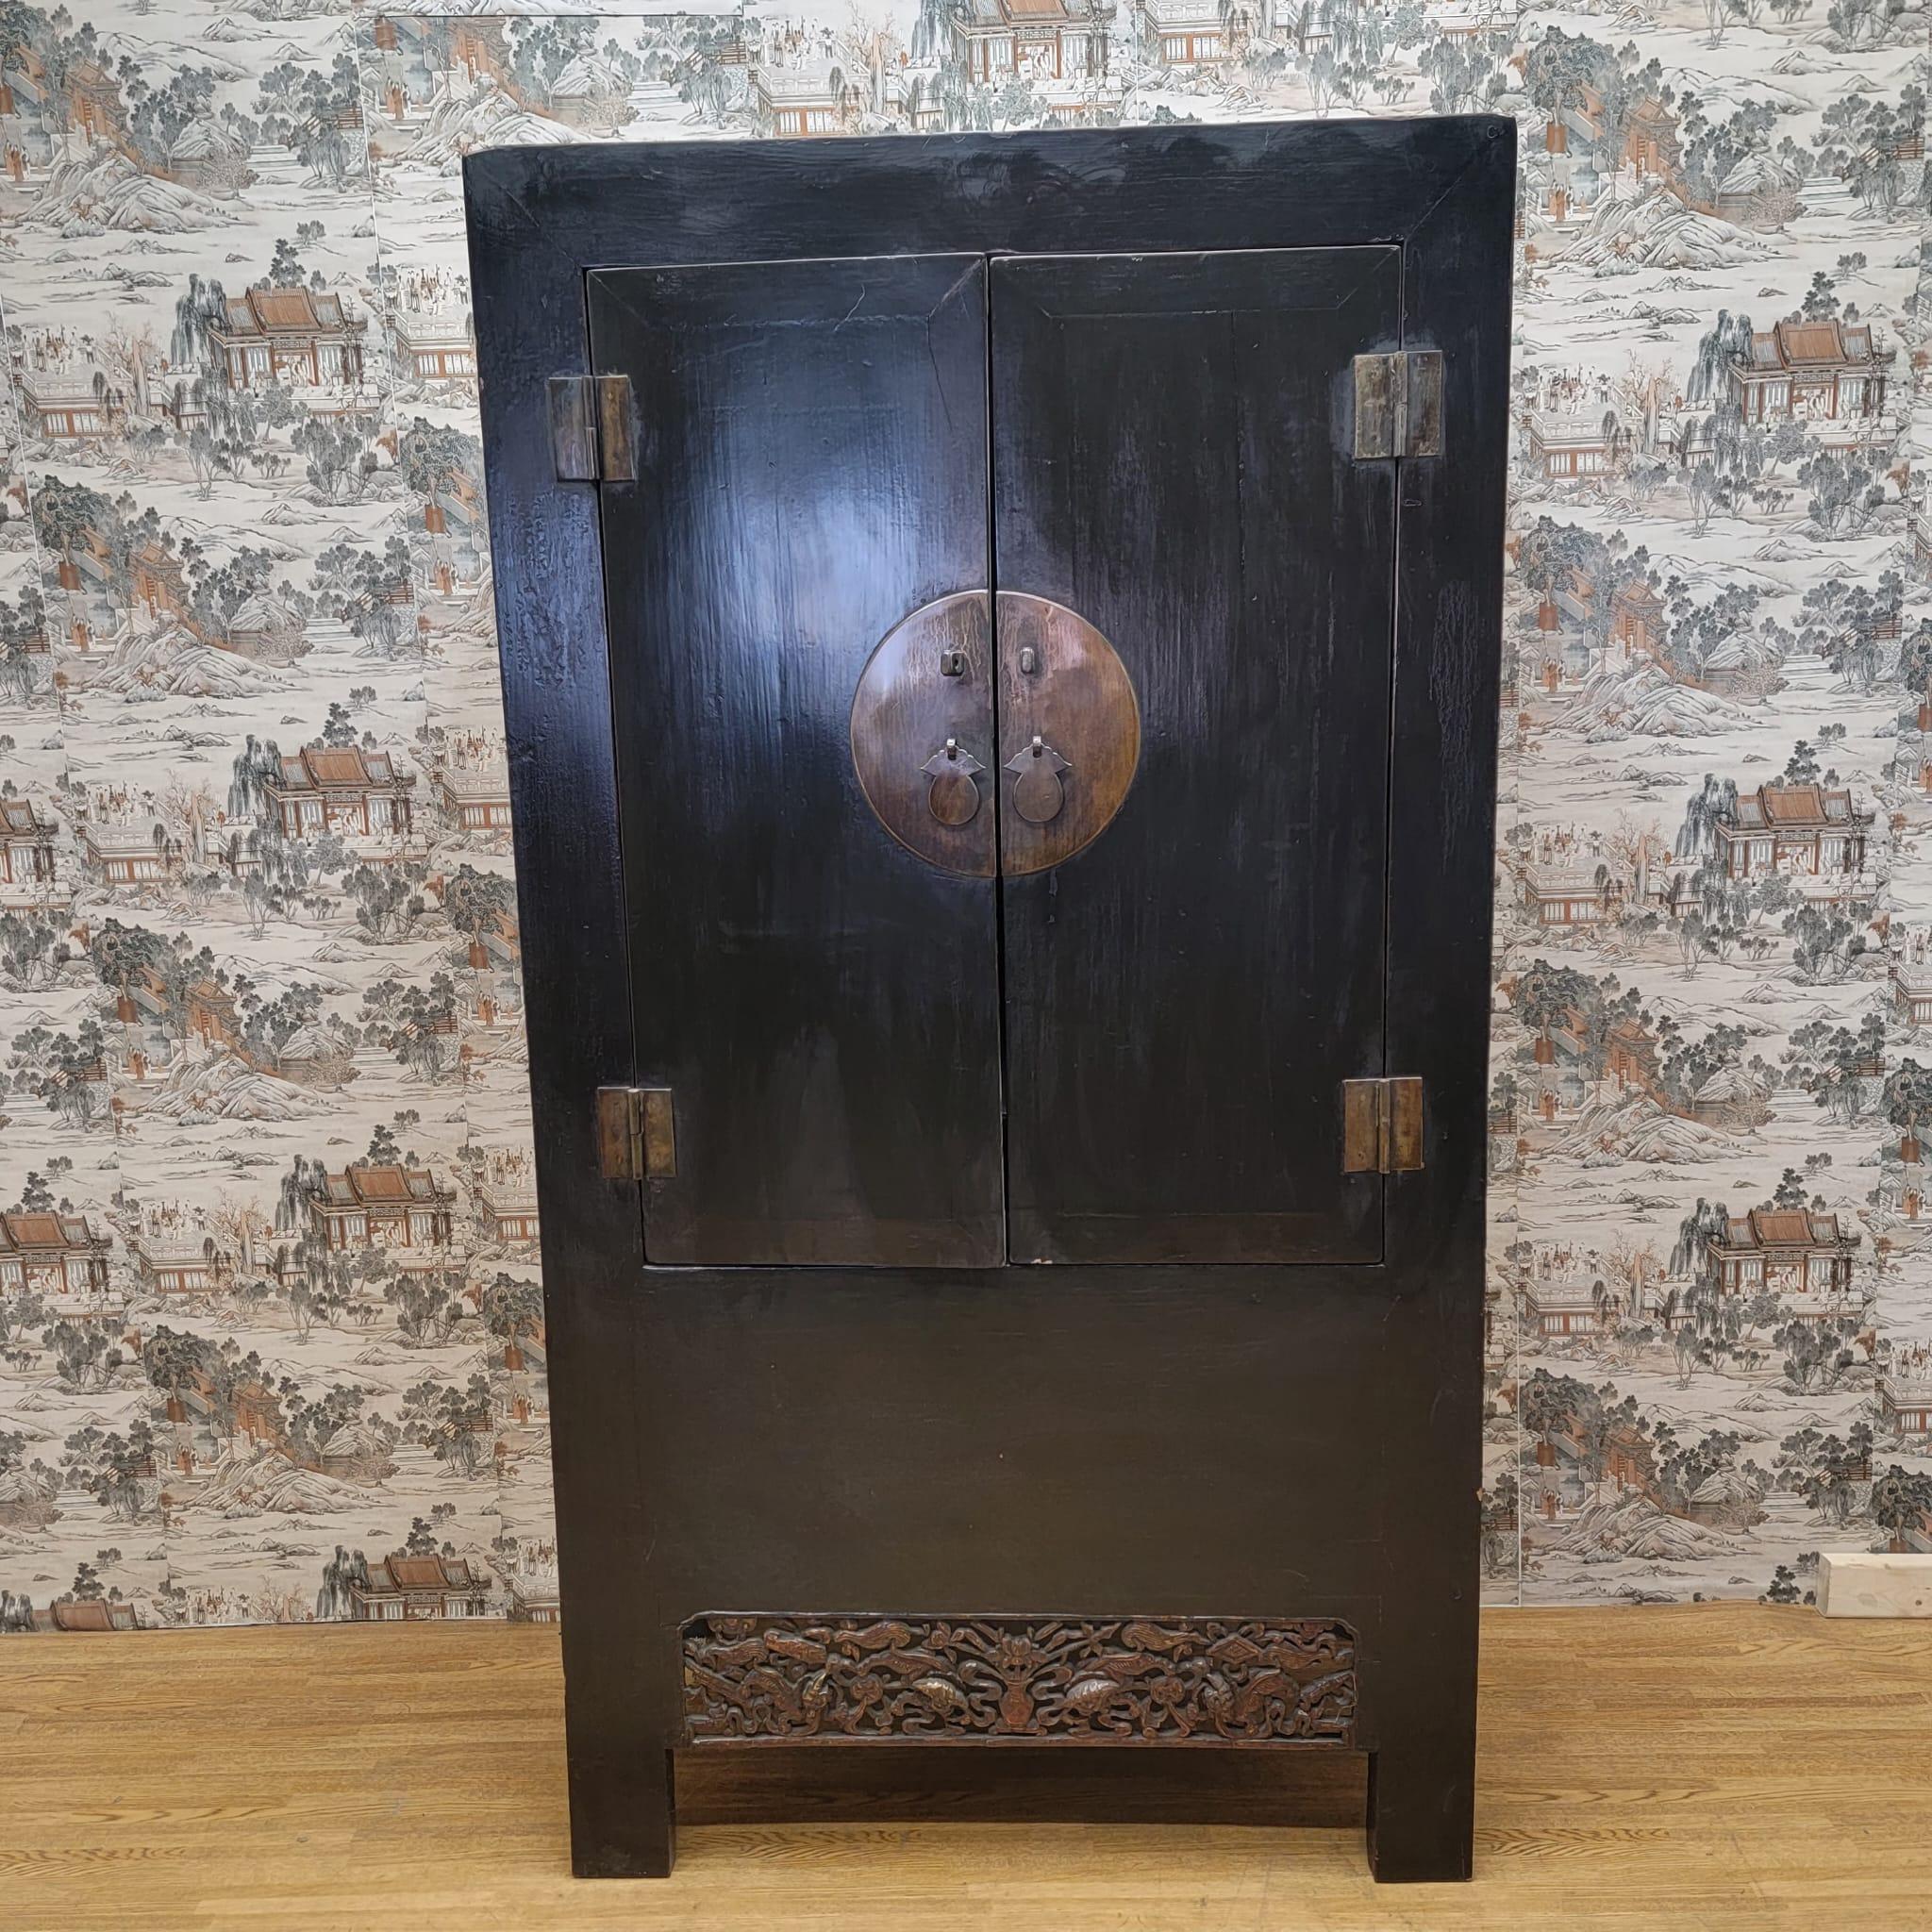 Antique Shanxi province elm cabinet with hand carved arpon.

This Elmwood cabinet with original color and patina and hardware is from the Shanxi Province of China. It has carving details at the bottom with original lacquer. The cabinet suitable to